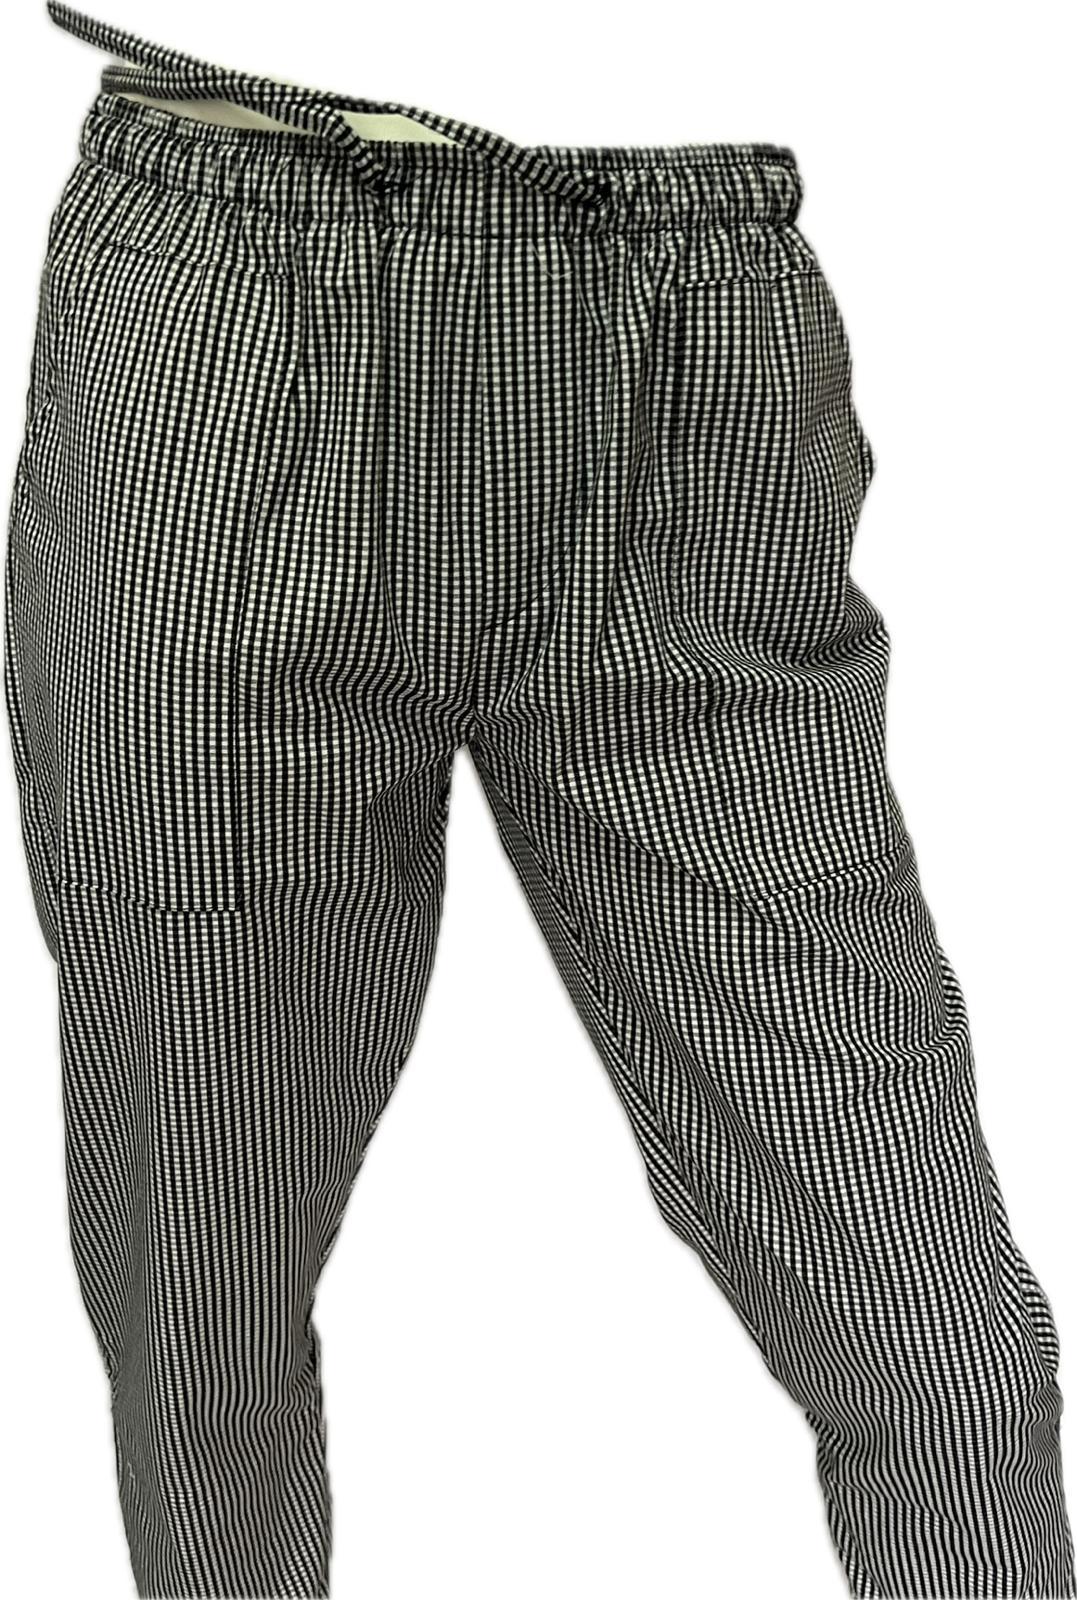 SALT AND PEPPER TROUSERS